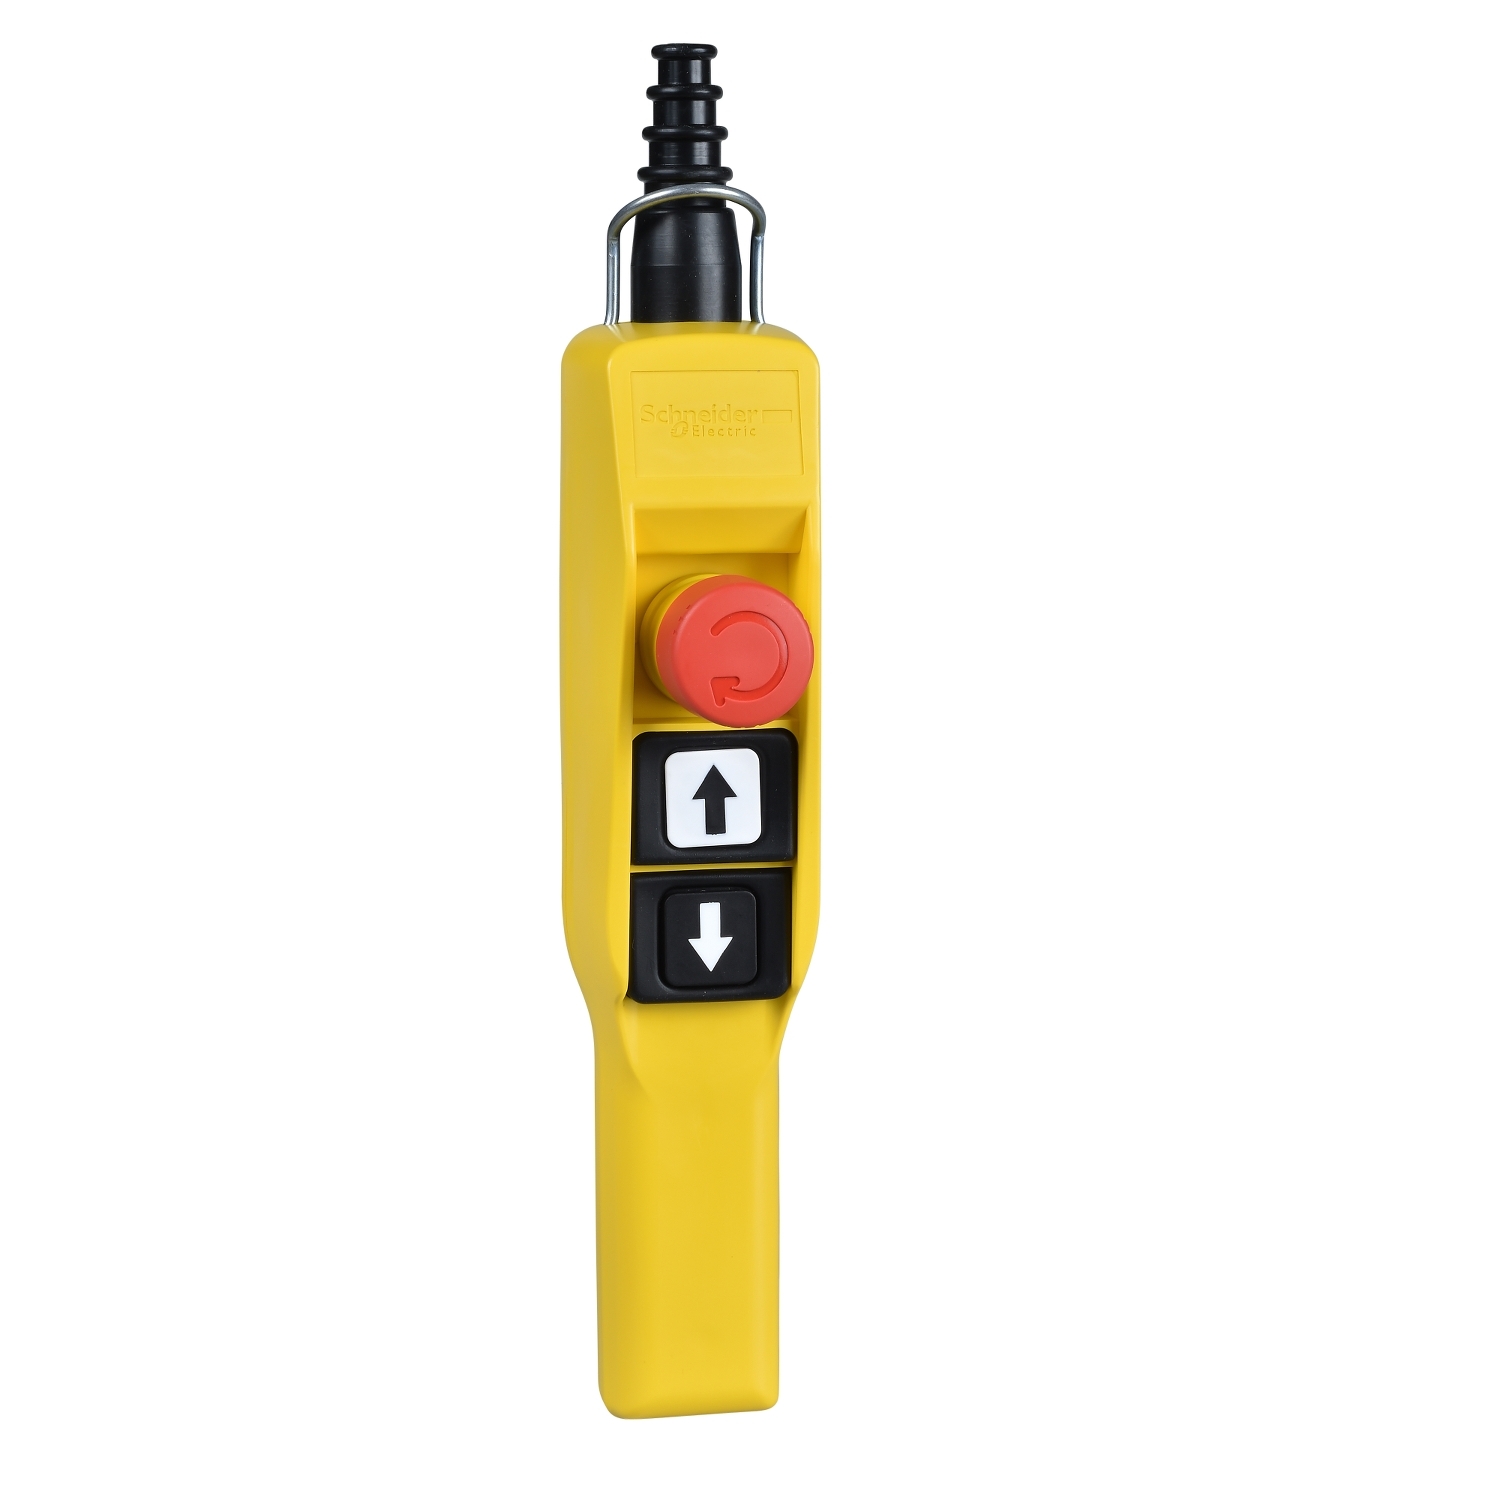 Harmony XAC, Pendant control station, plastic, yellow, pistol grip, 2 booted push buttons, 1 emergency stop